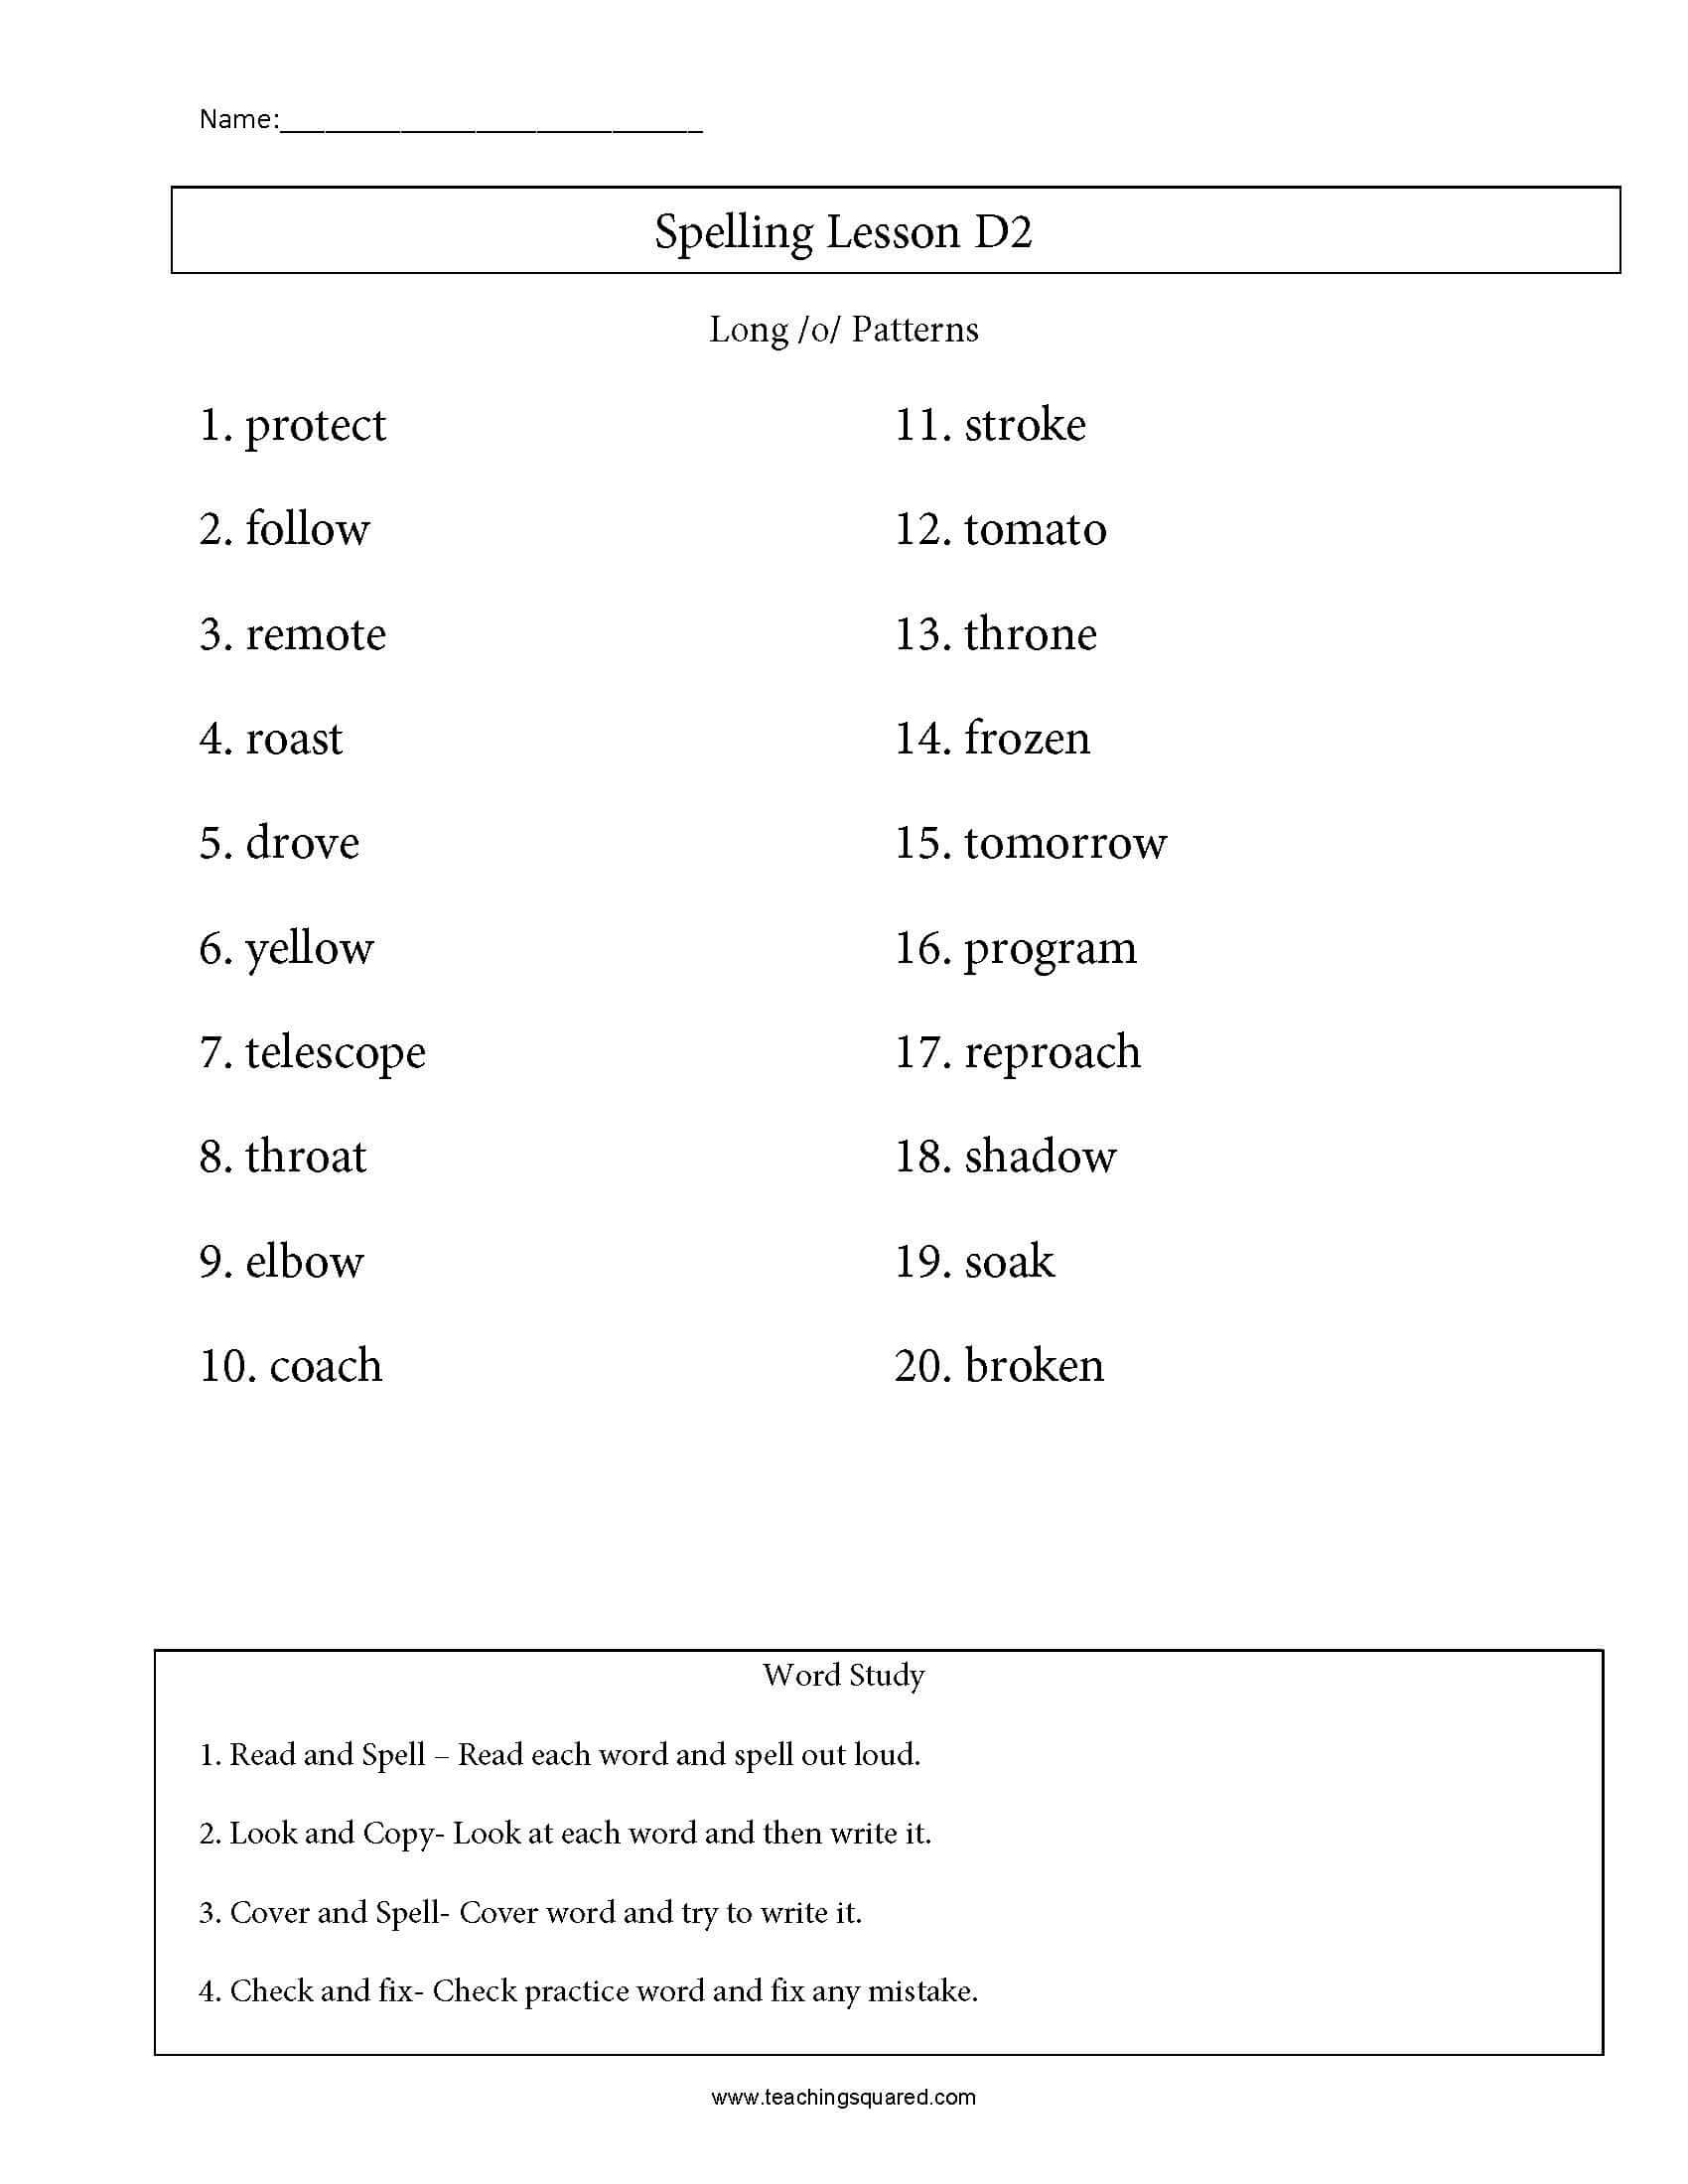 Spelling list and practice